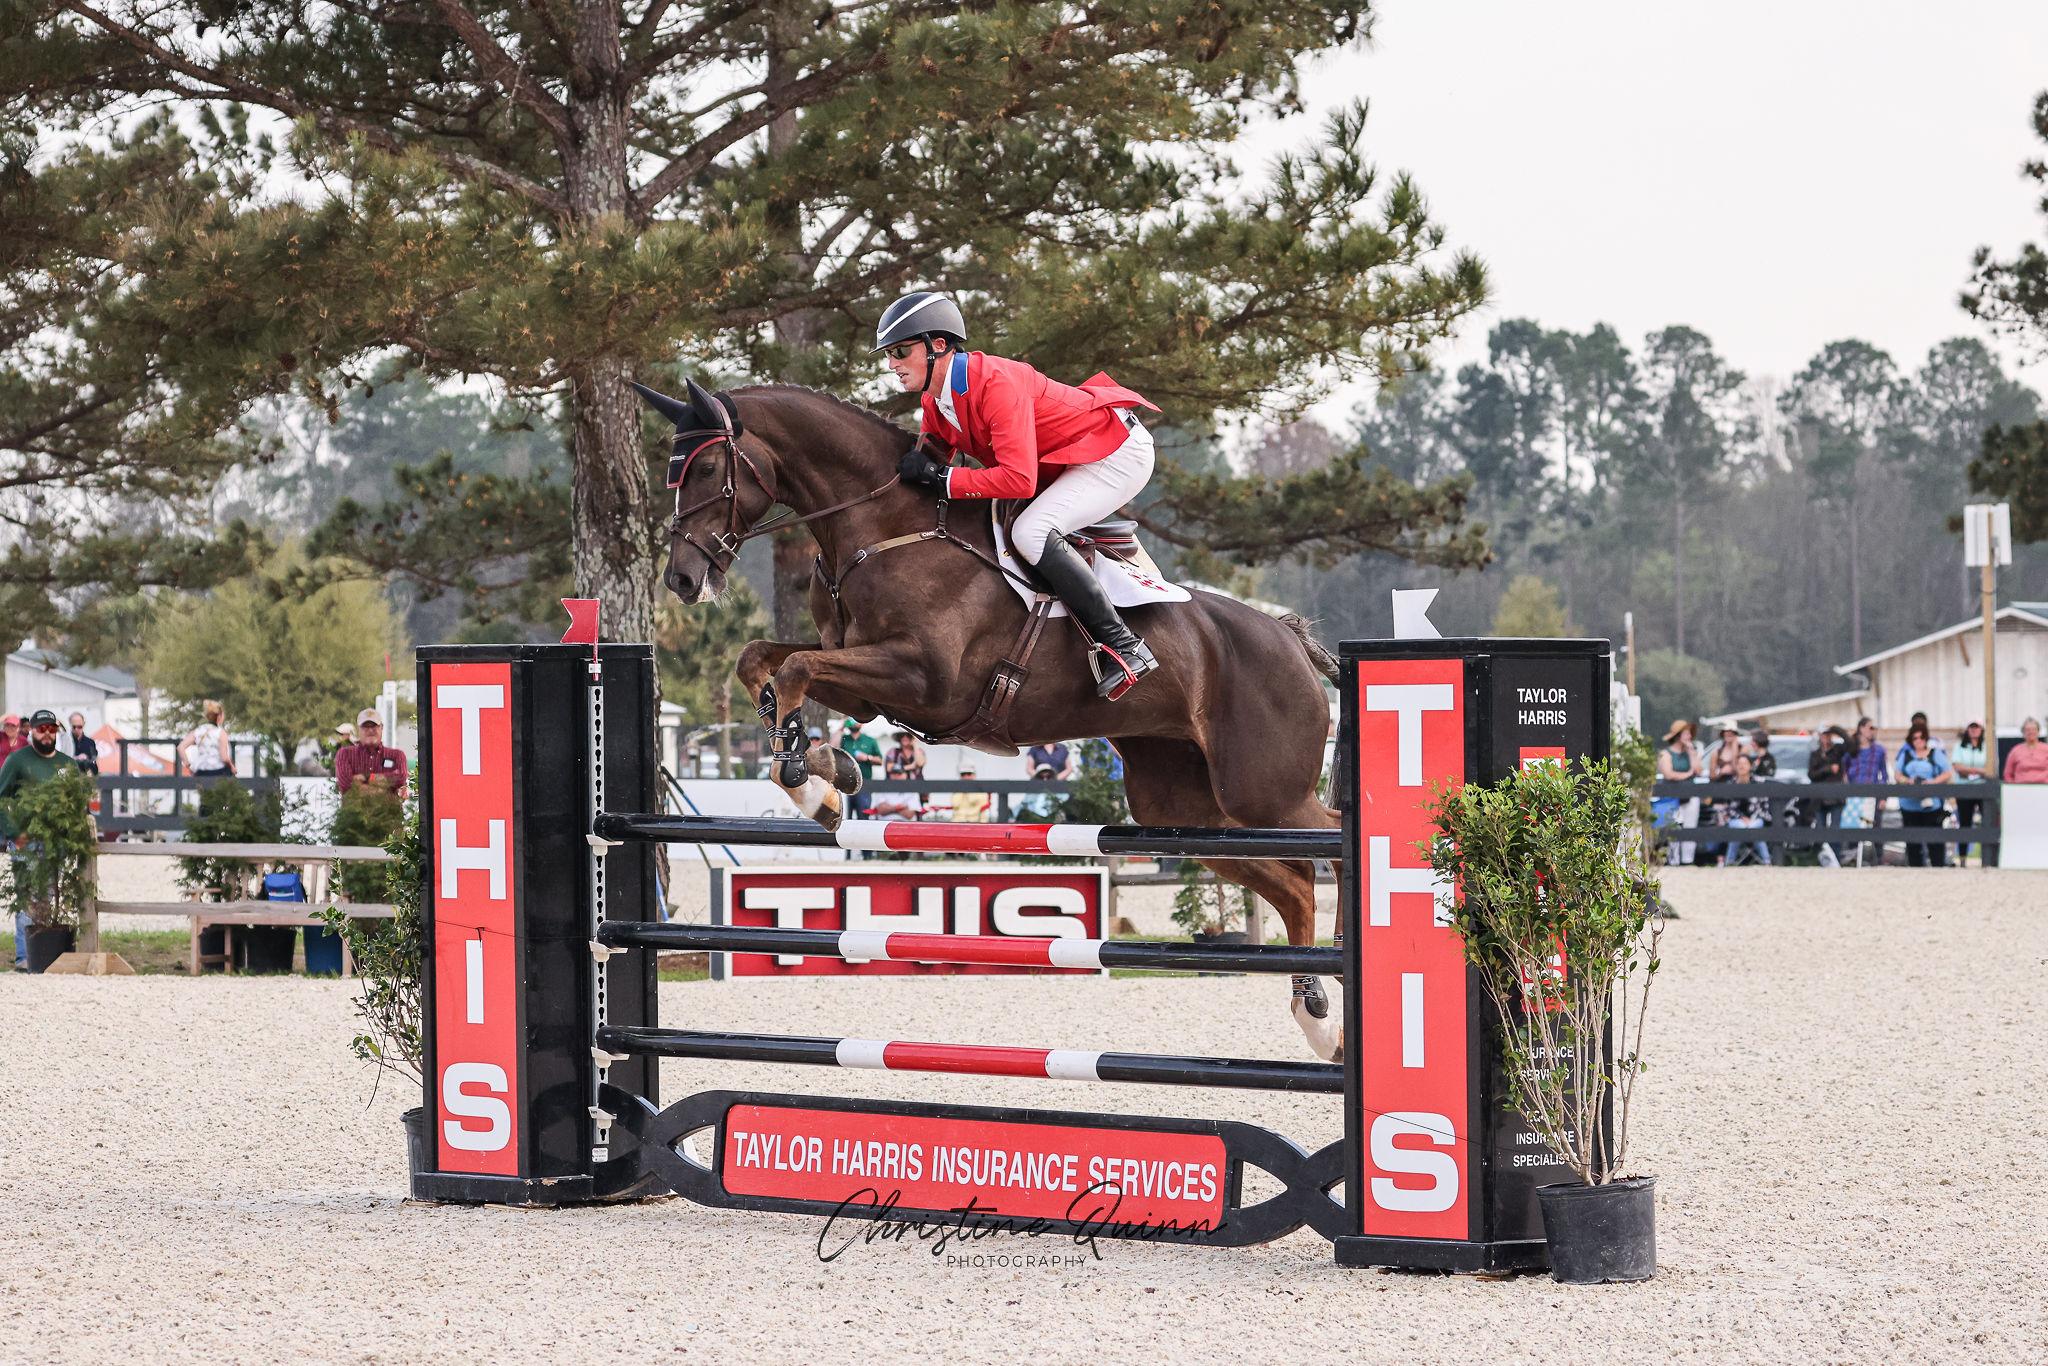 Dramatic Show Jumping Sees Doug Payne Hold the $50,000 Grand-Prix Eventing Festival Lea